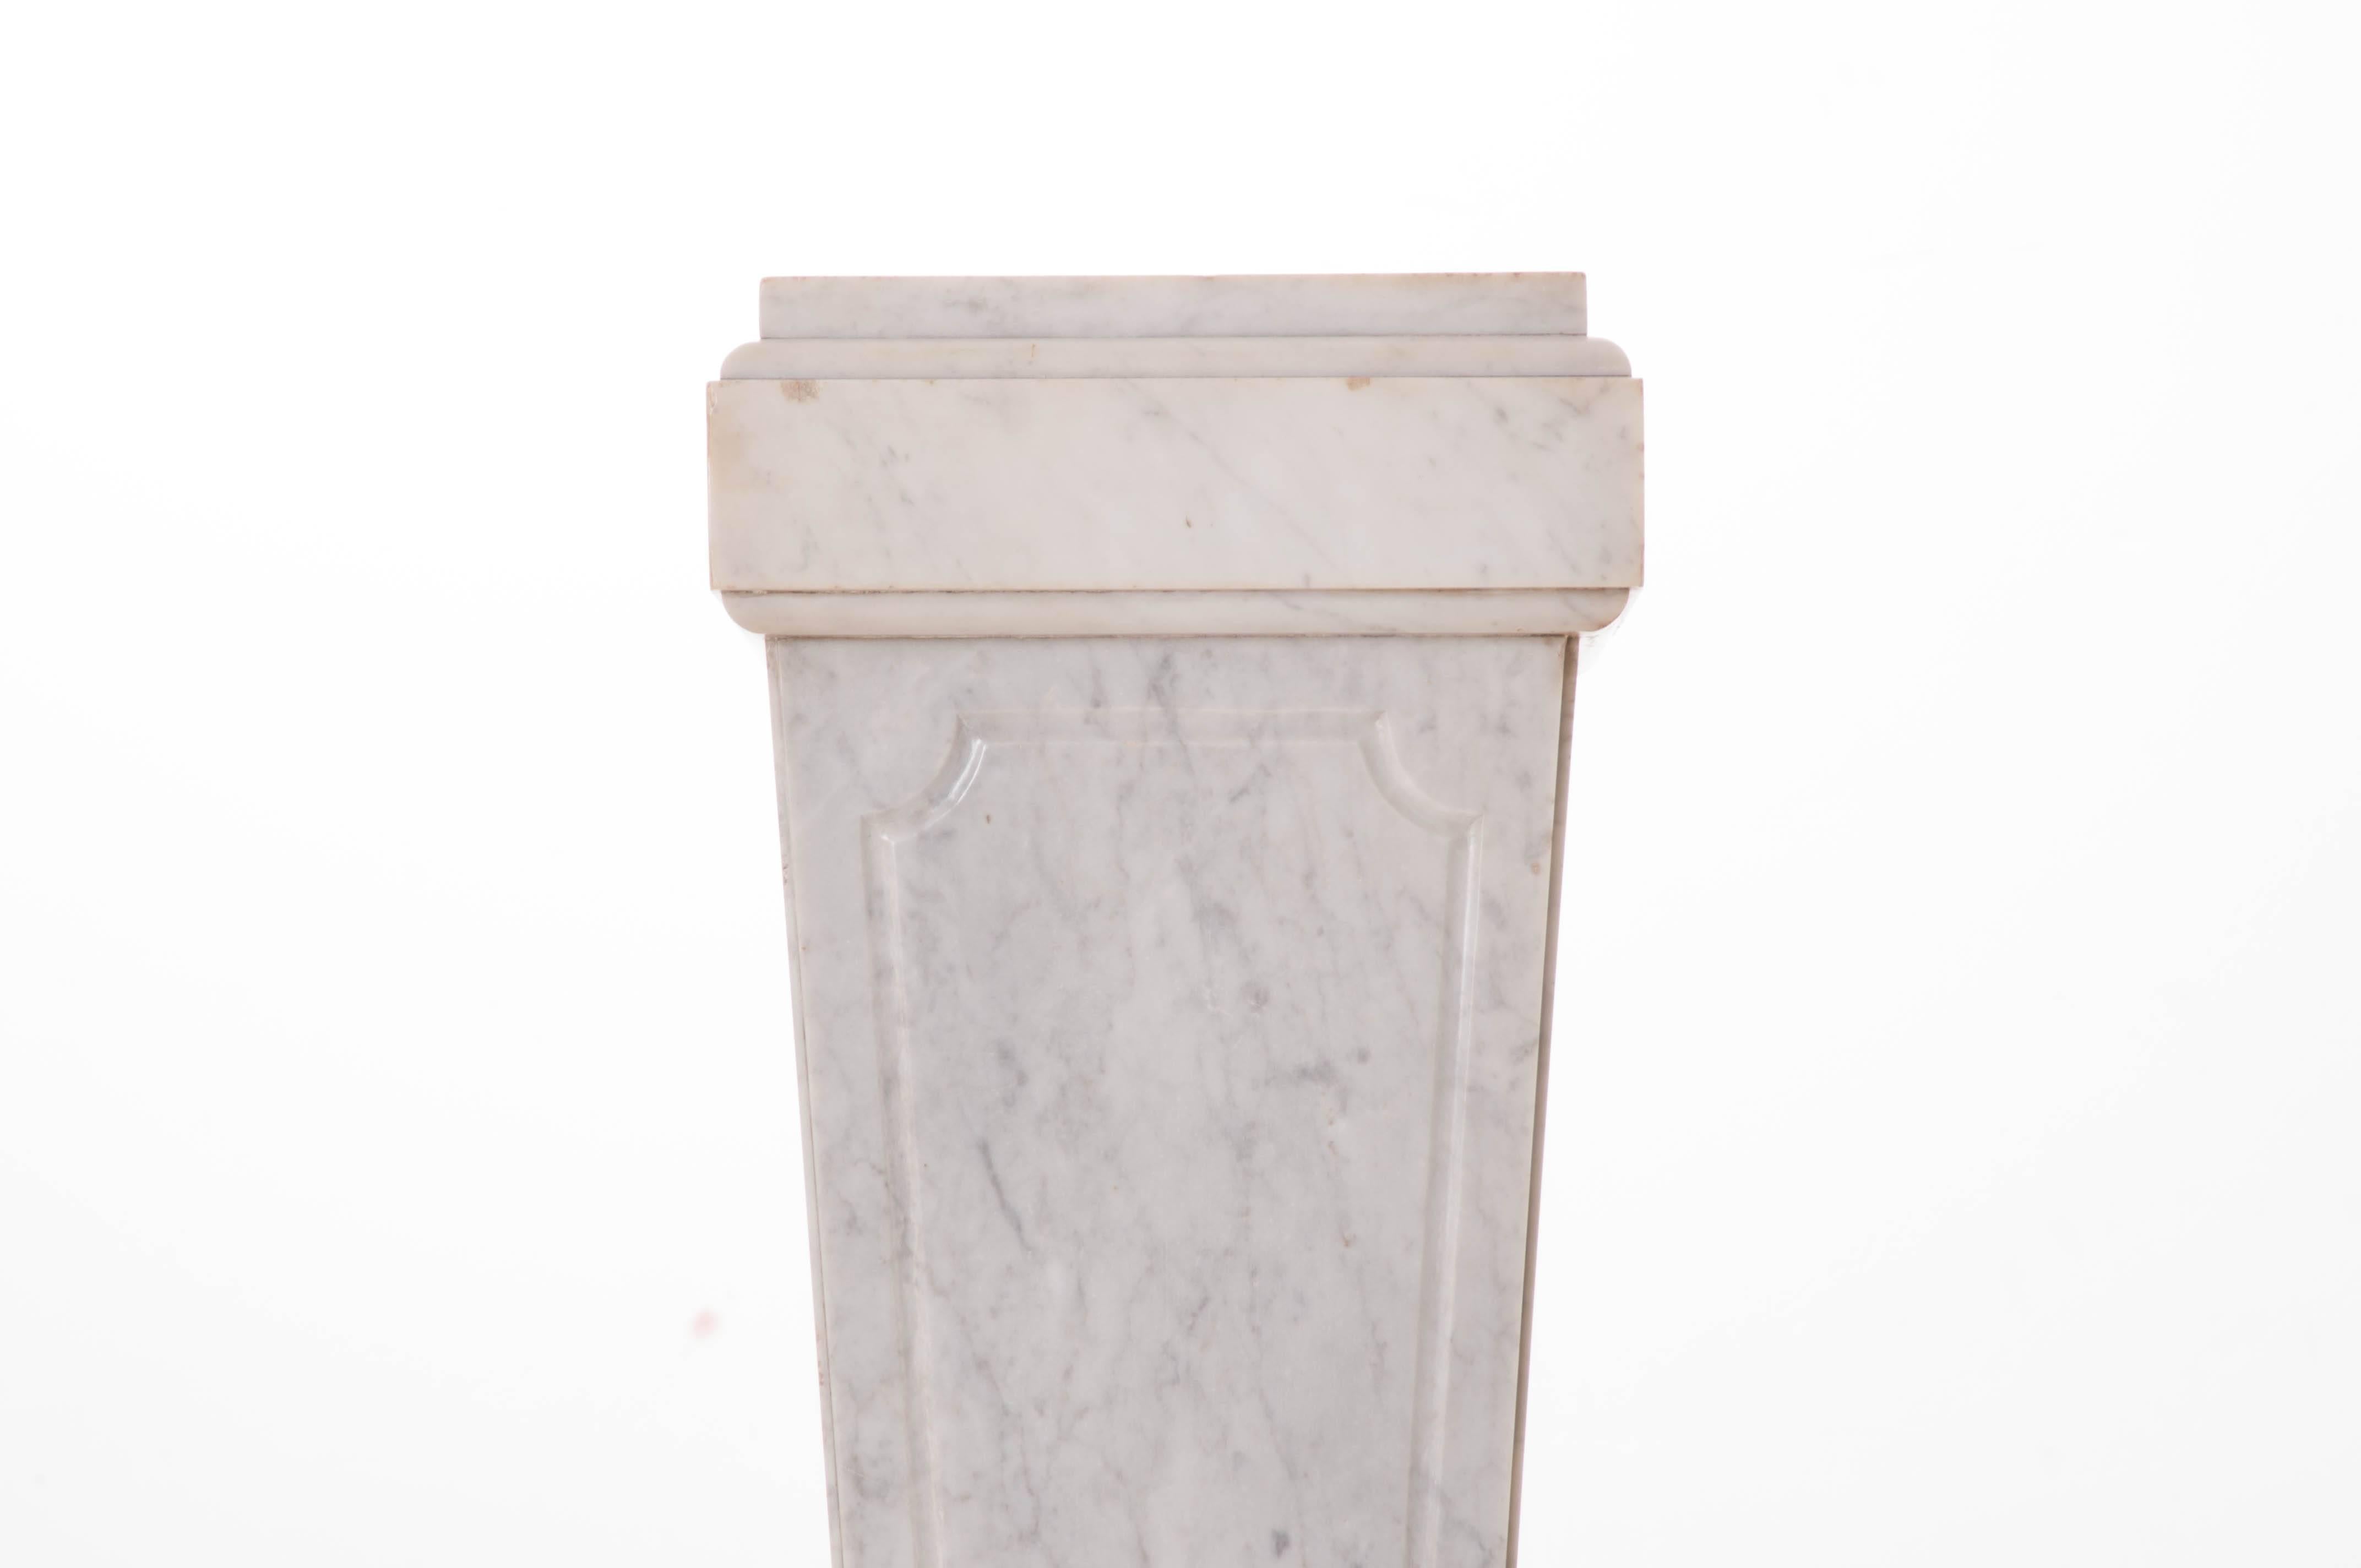 A beautiful white marble pedestal from 19th century, France. This pedestal would be a wonderful stand for a potted plant, artistic sculpture, or for statuary. This marble pedestal's tapered design and Classic style will add an element of